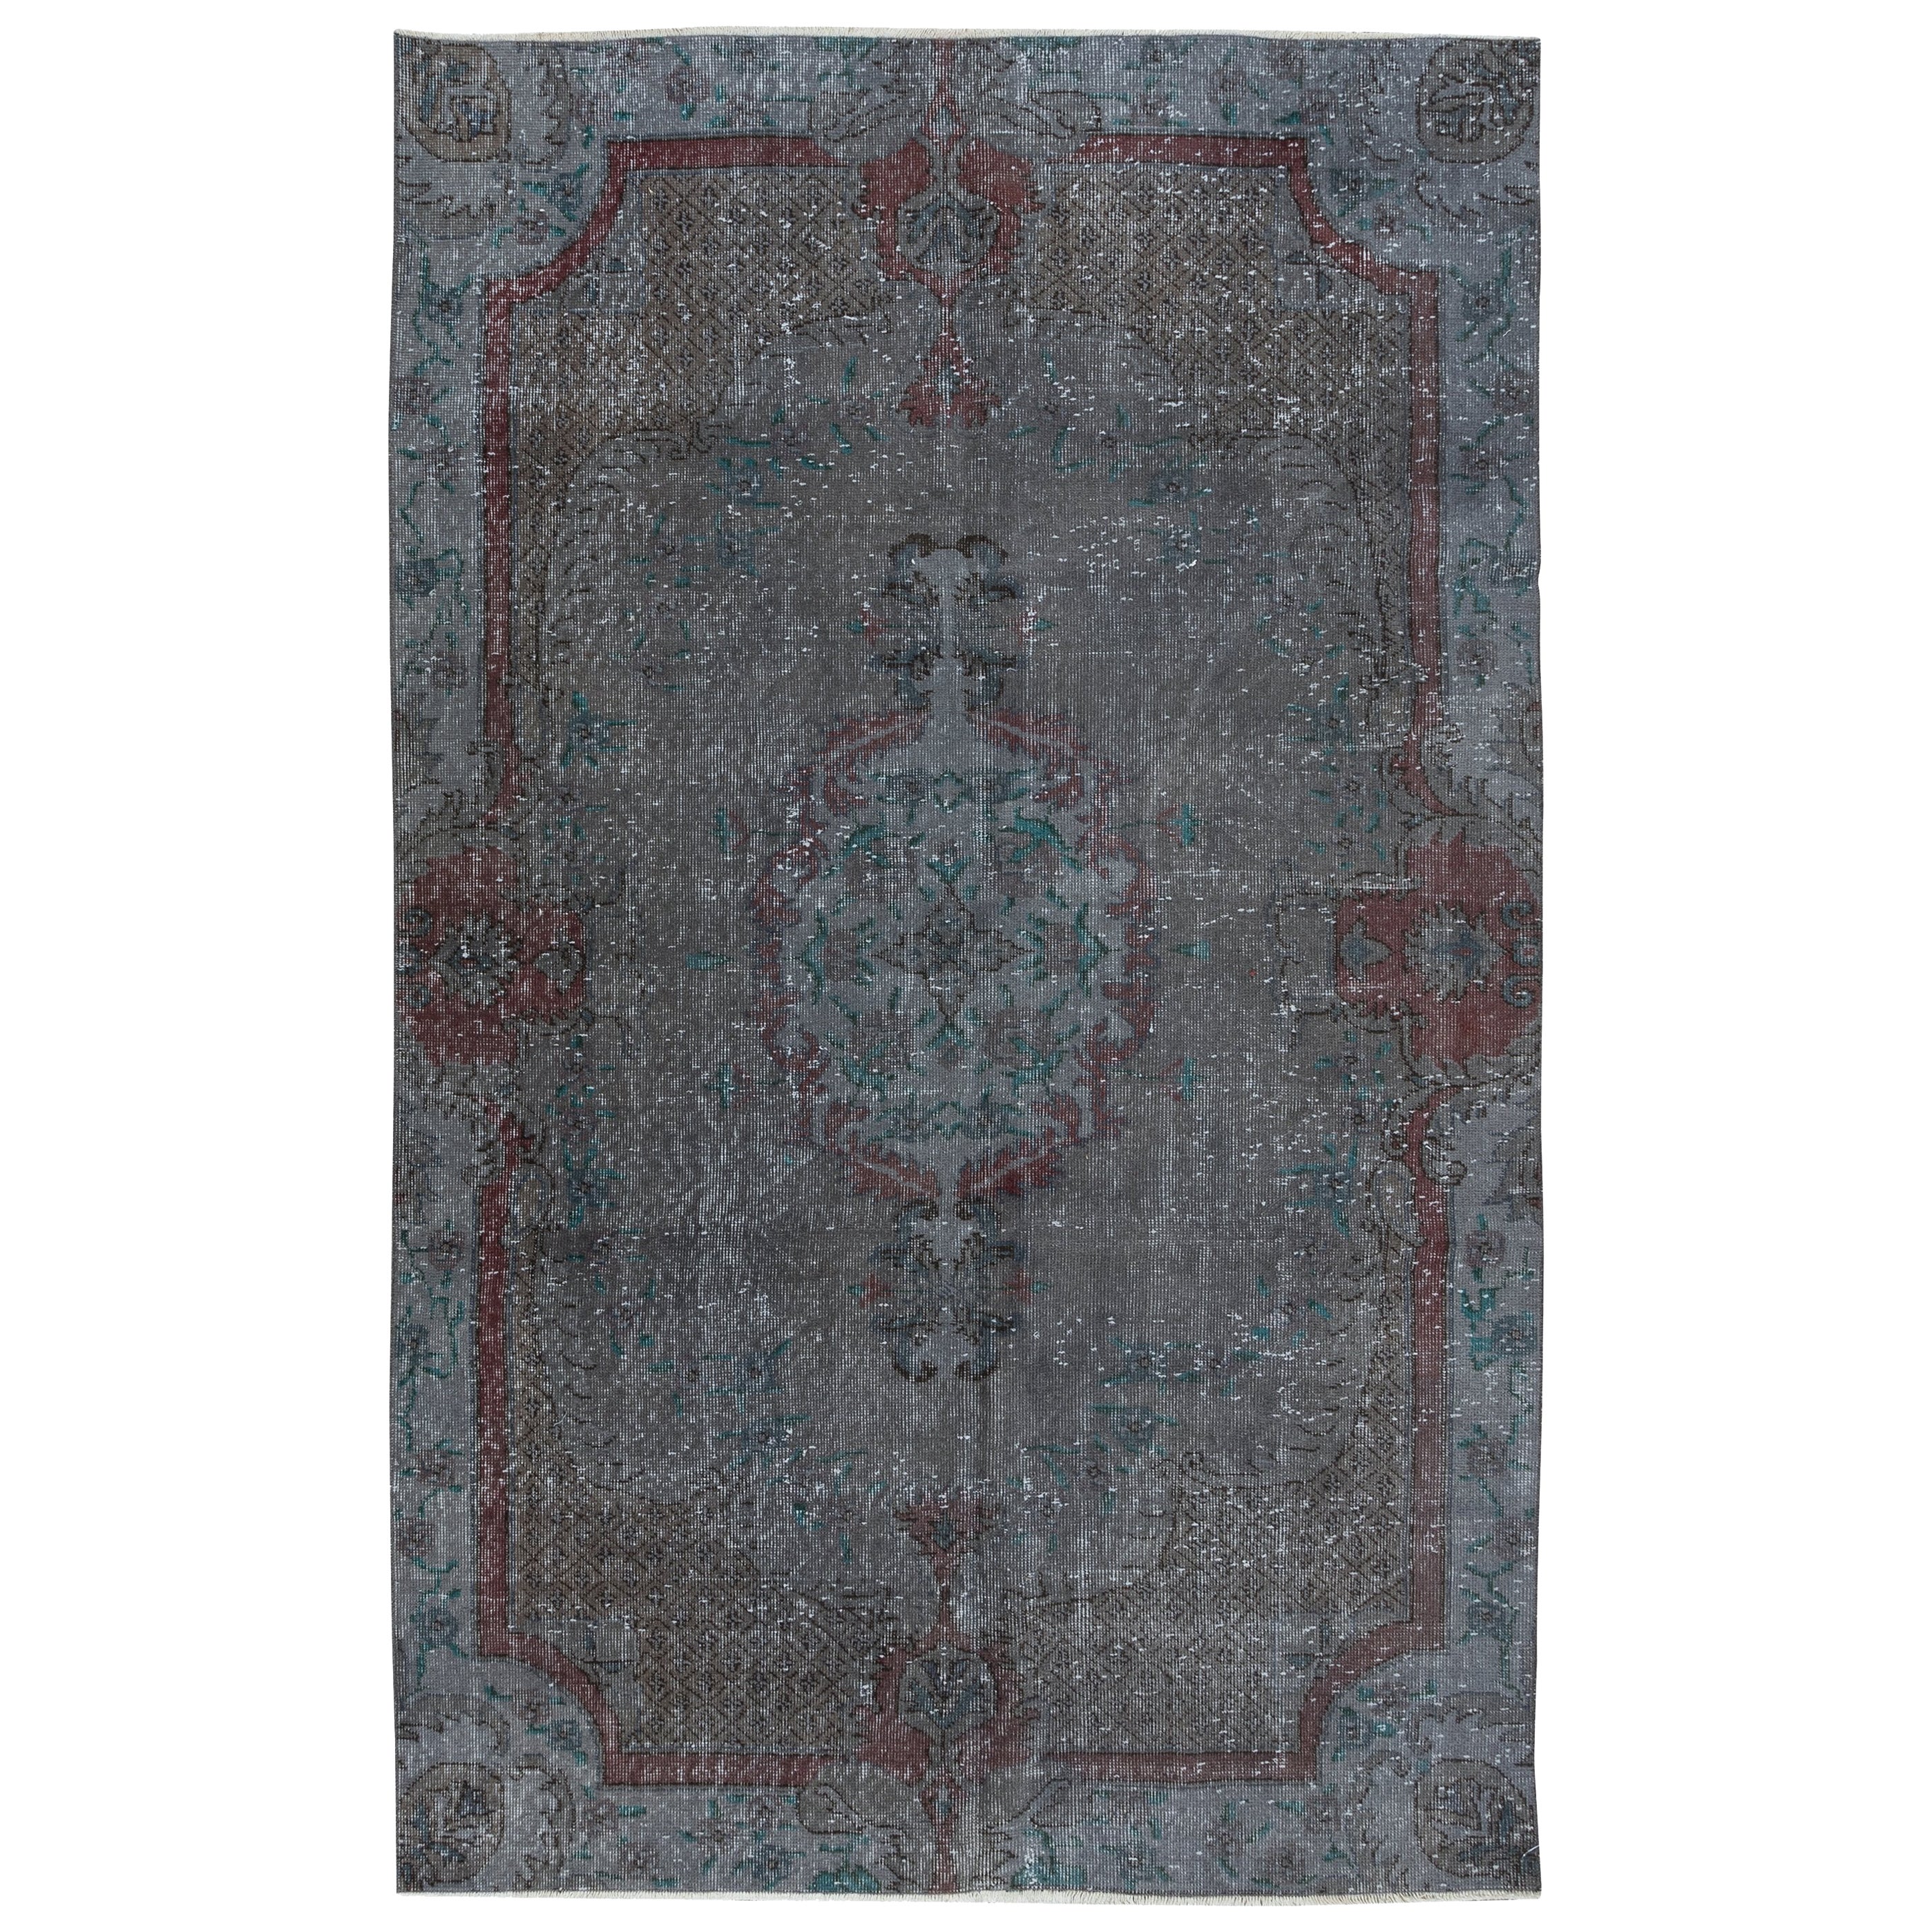 5.3x8.3 Ft Modern Handmade Turkish Low Pile Area Rug in Gray, Maroon Red & Green